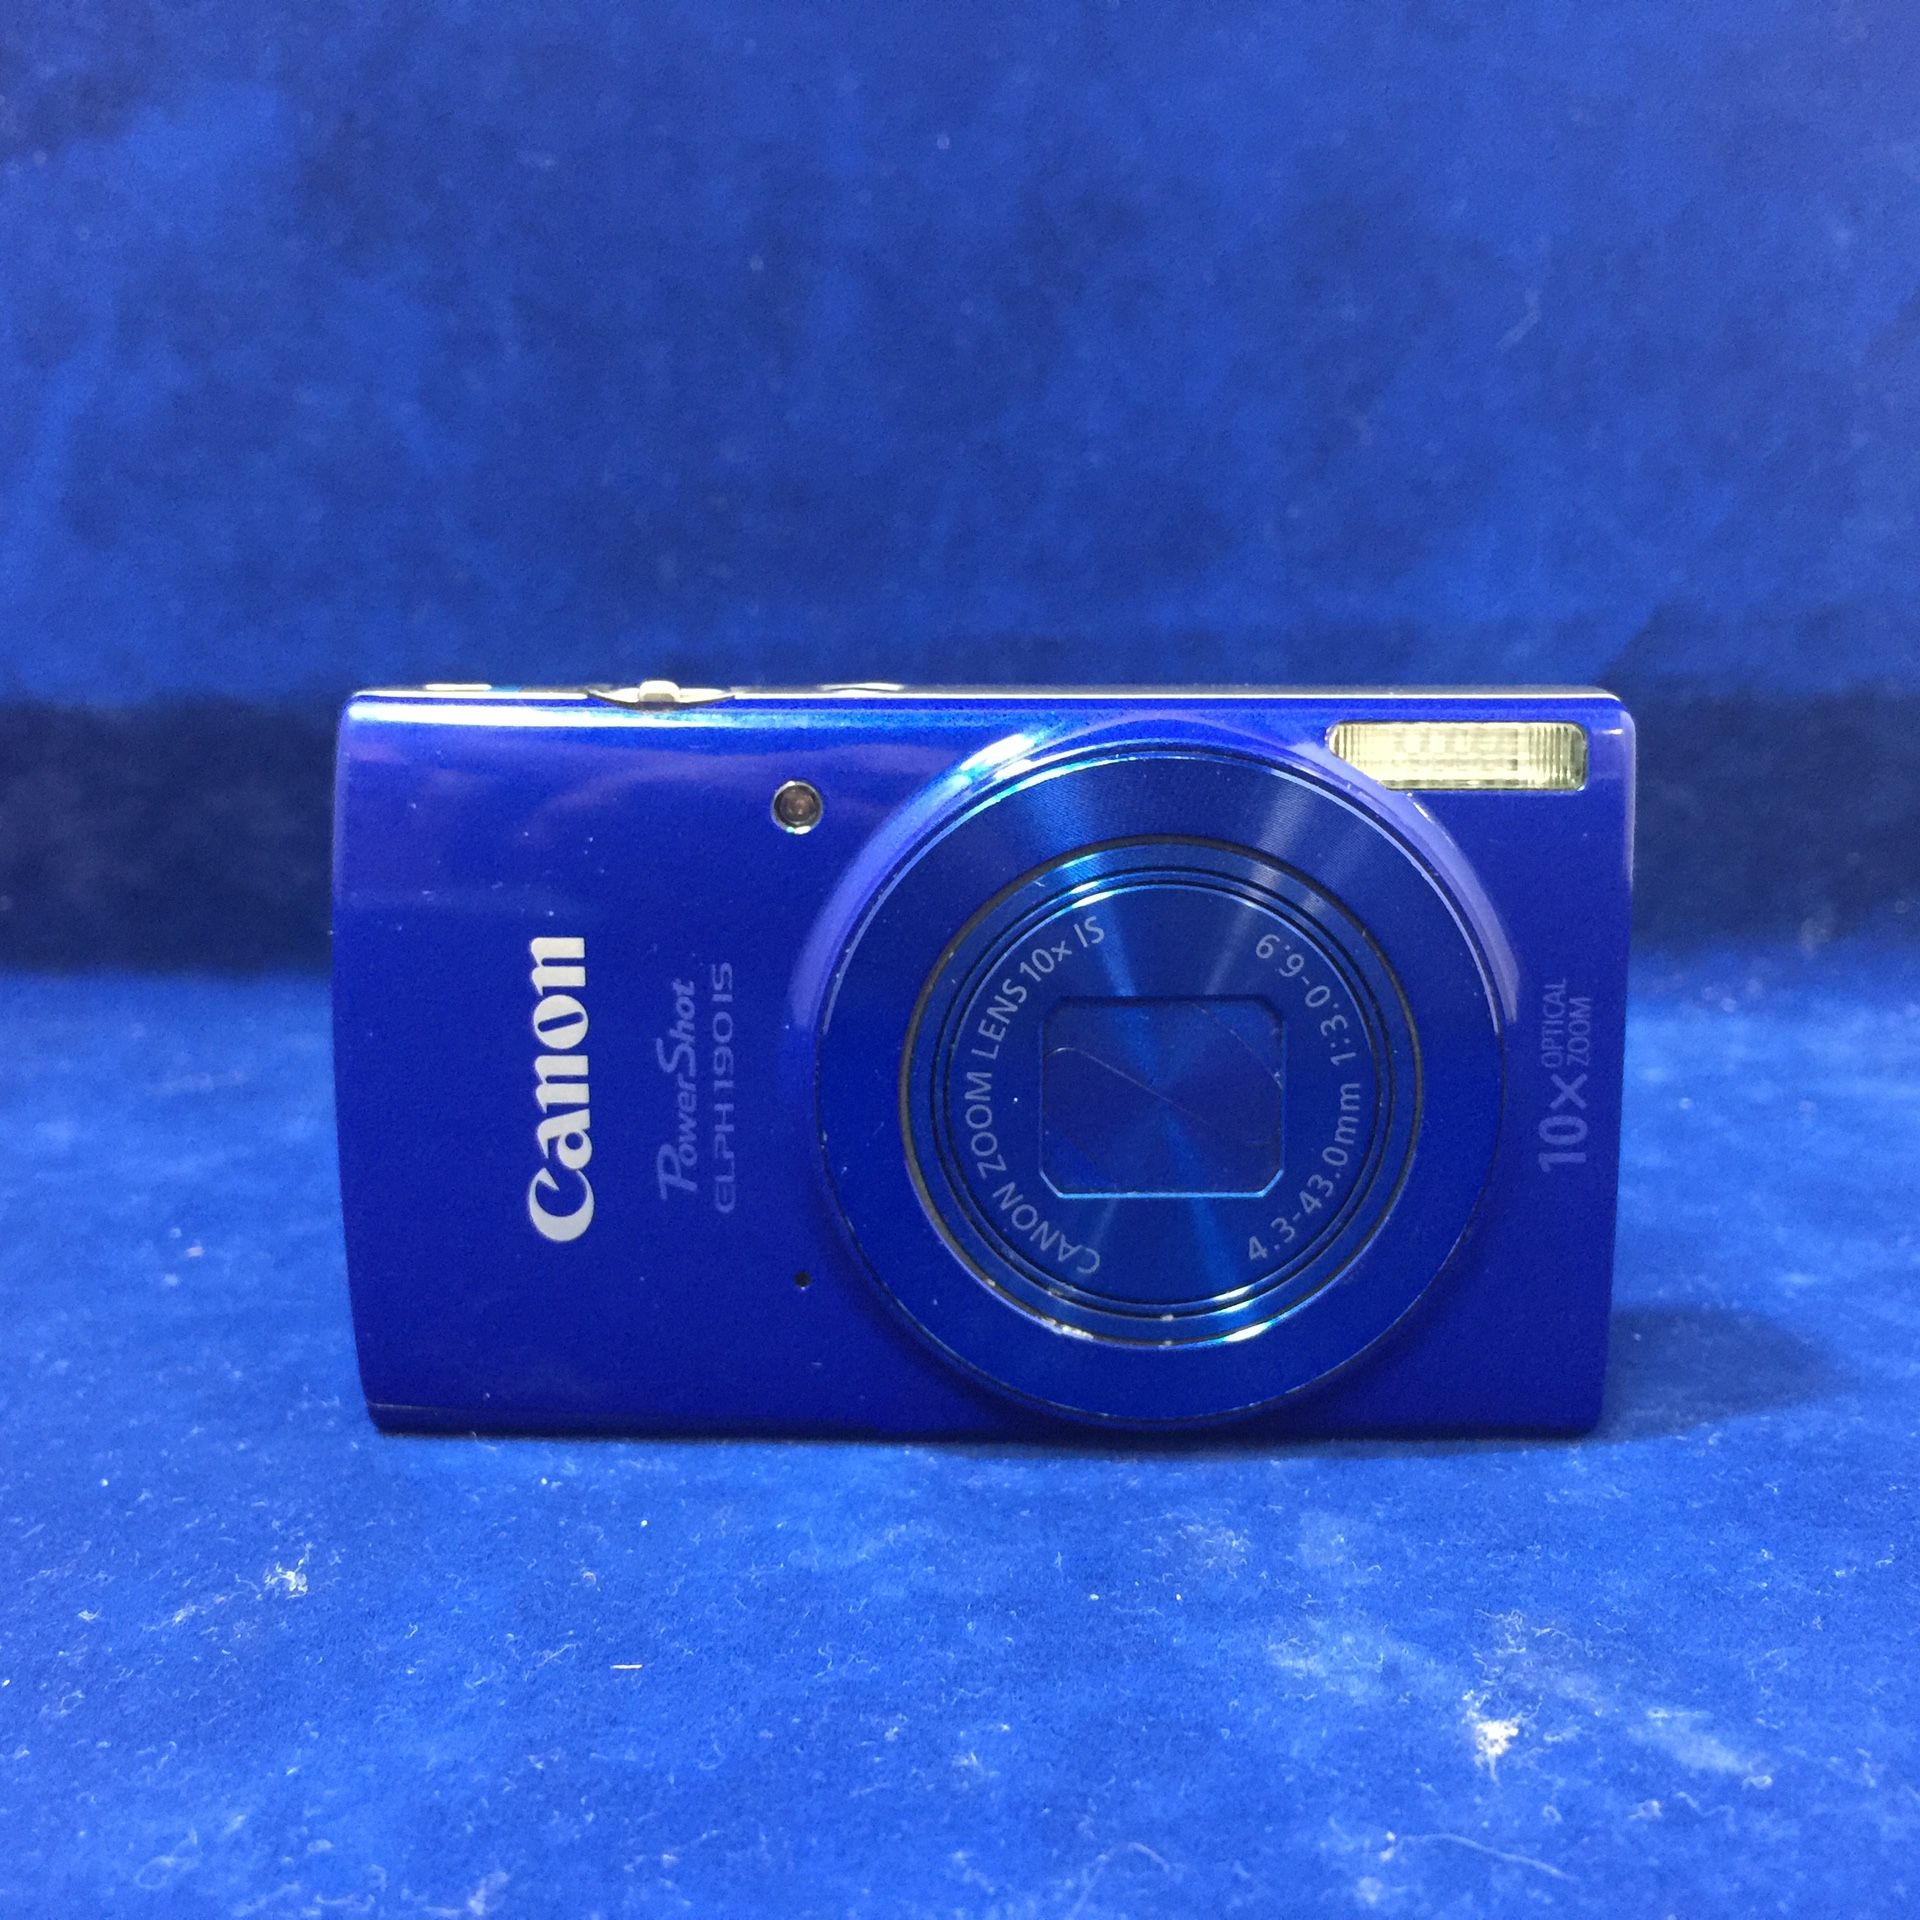 Canon Powershot Camera w/out charger (Model: ELPH190IS)